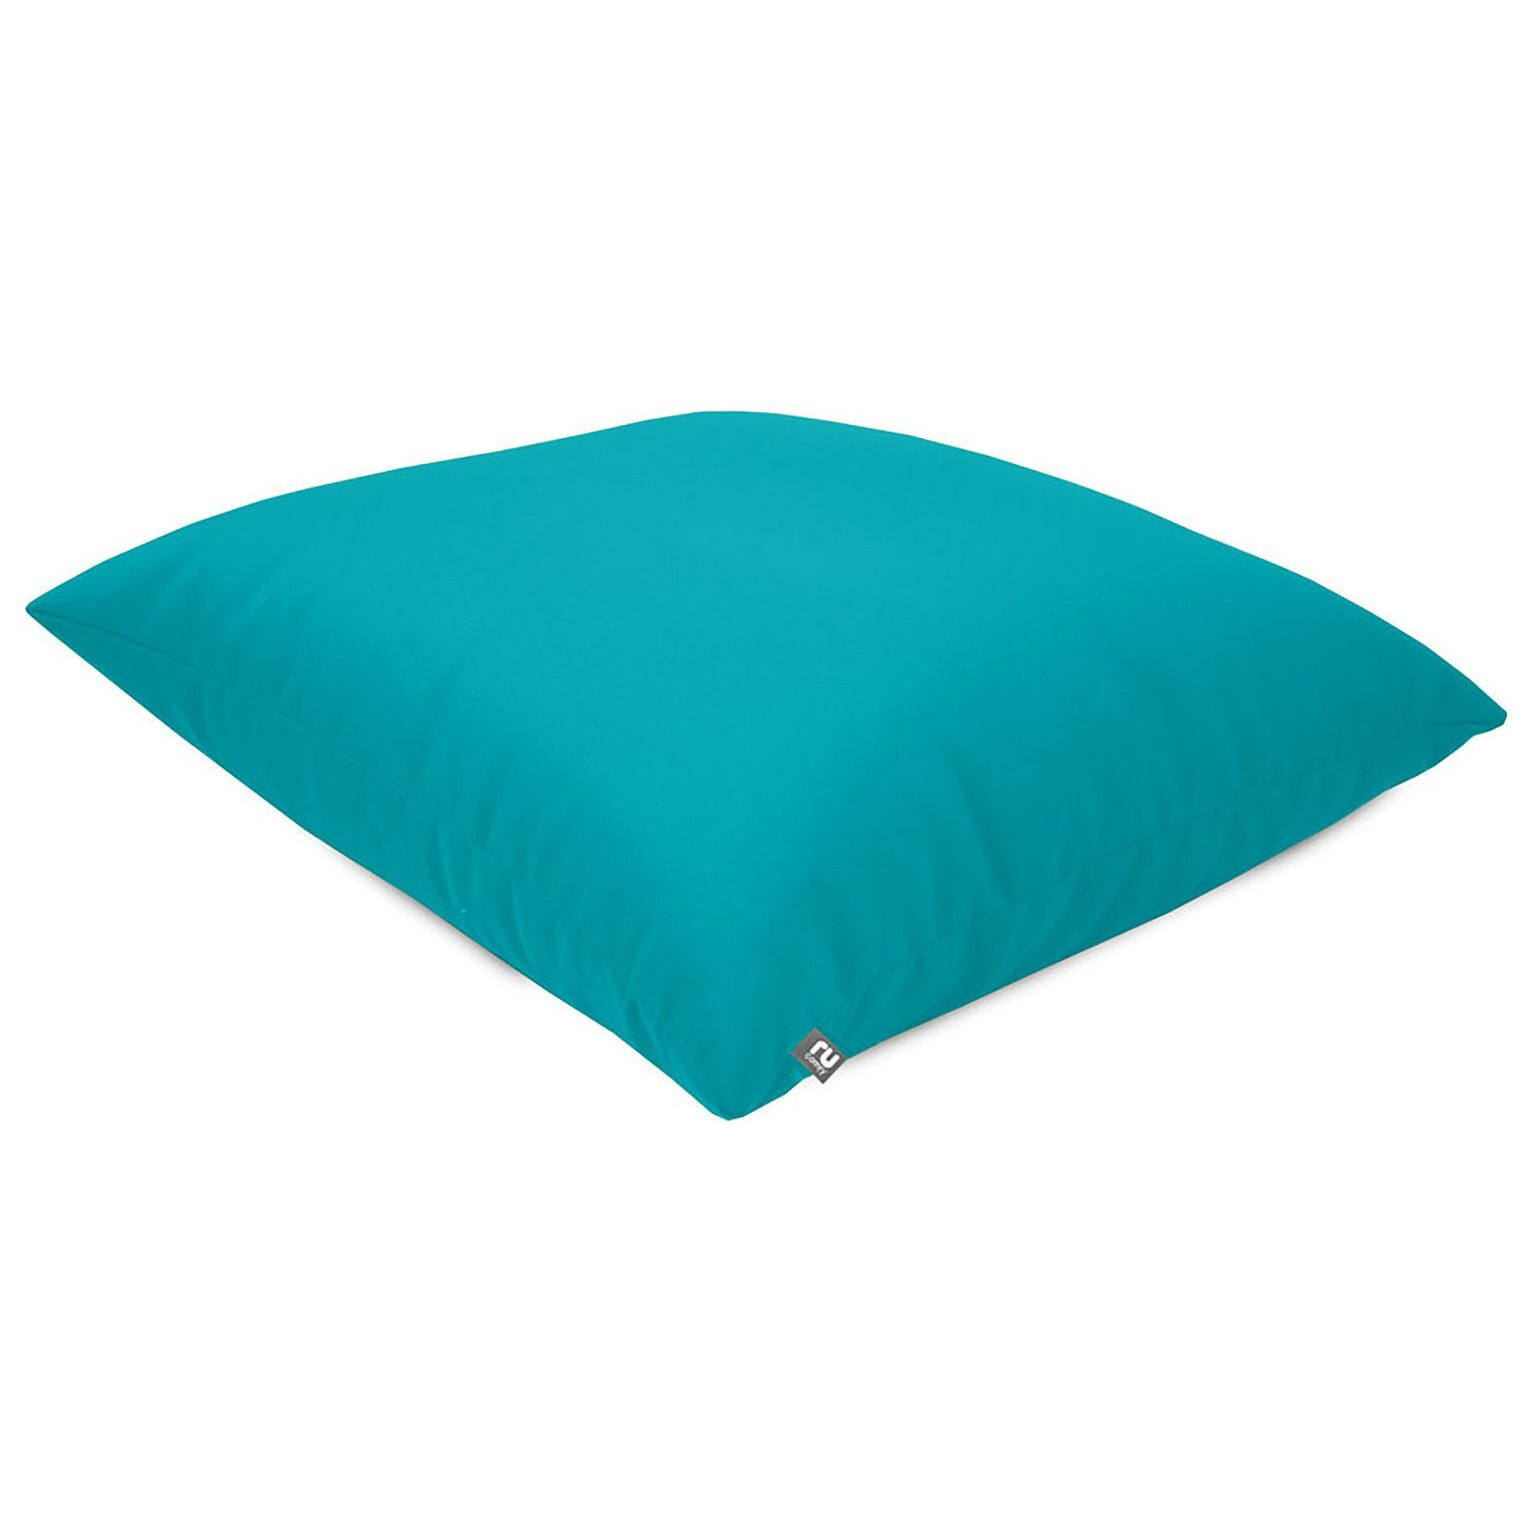 rucomfy Indoor Outdoor Large Floor Cushion - Turquoise - image 1